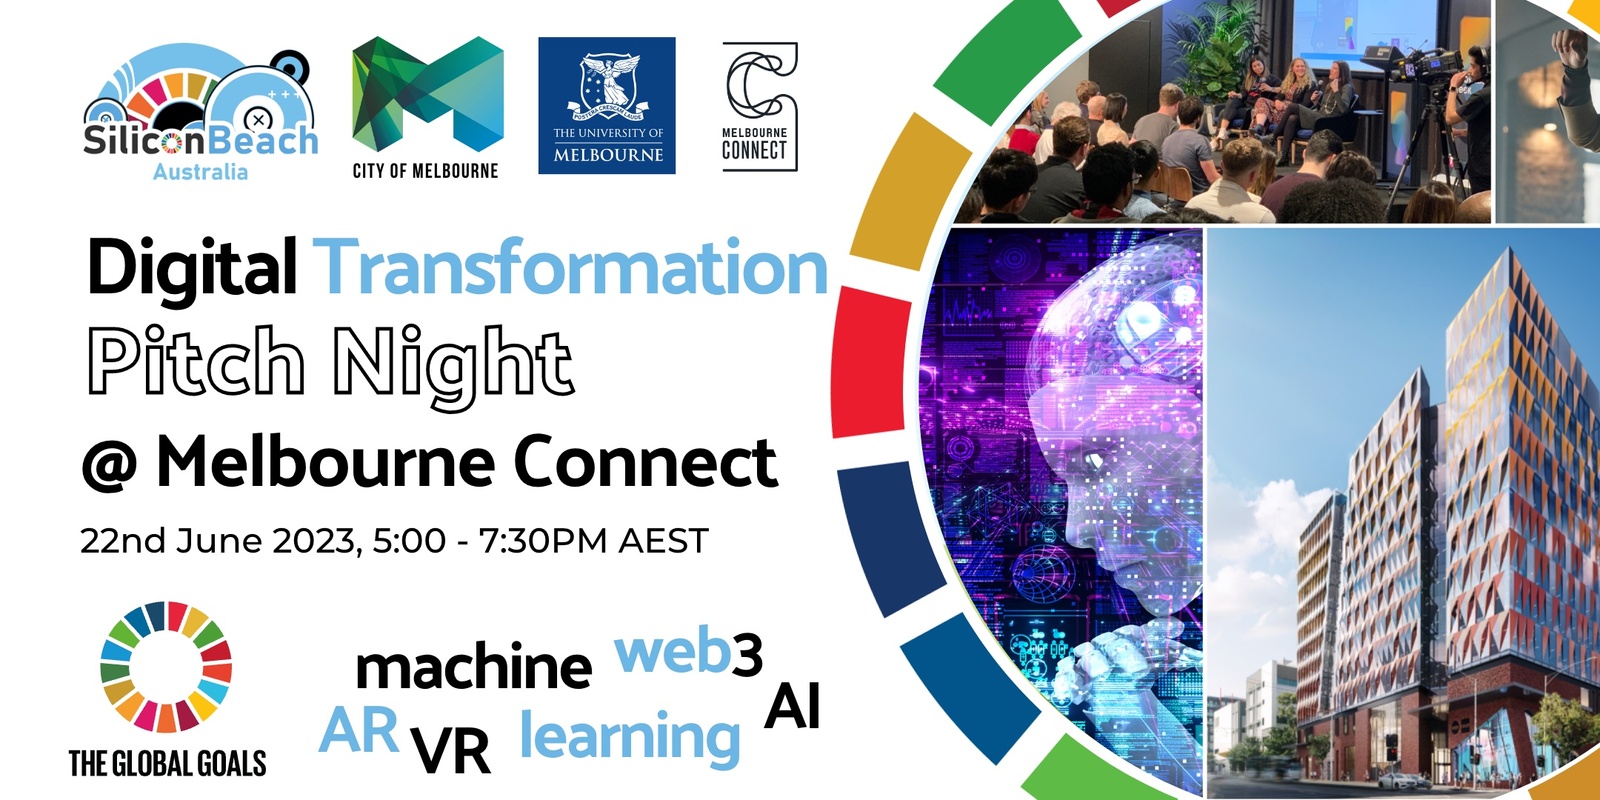 Banner image for Digital Transformation Pitch Night @ Melbourne Connect